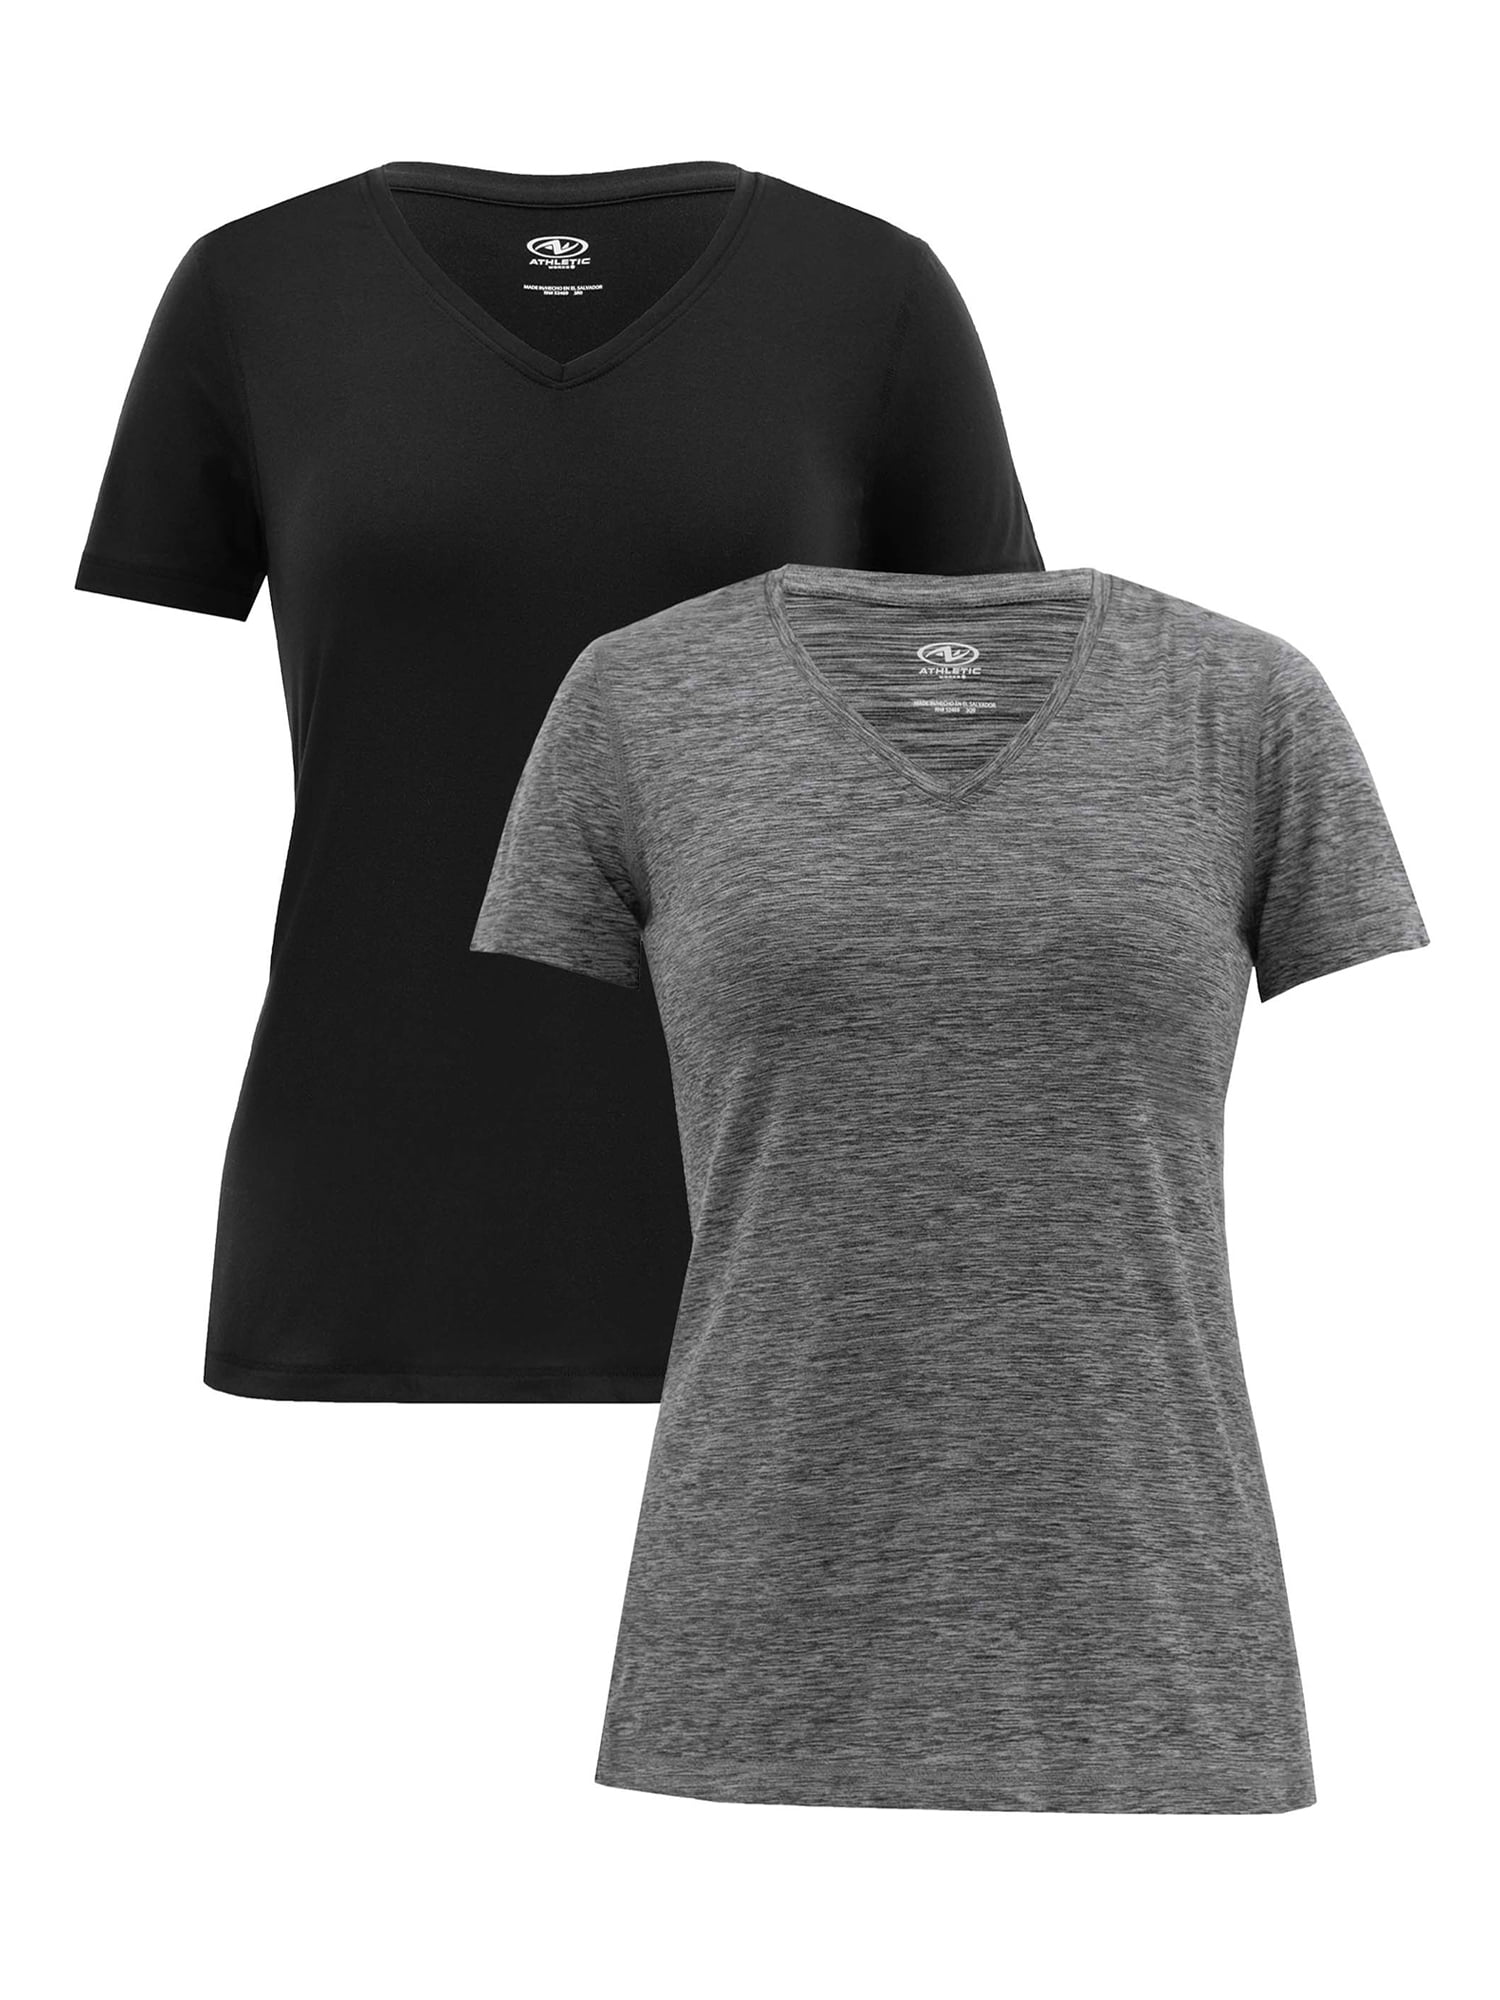 Tailored Athlete Athletic Fit Stretch T-Shirt, Black, S